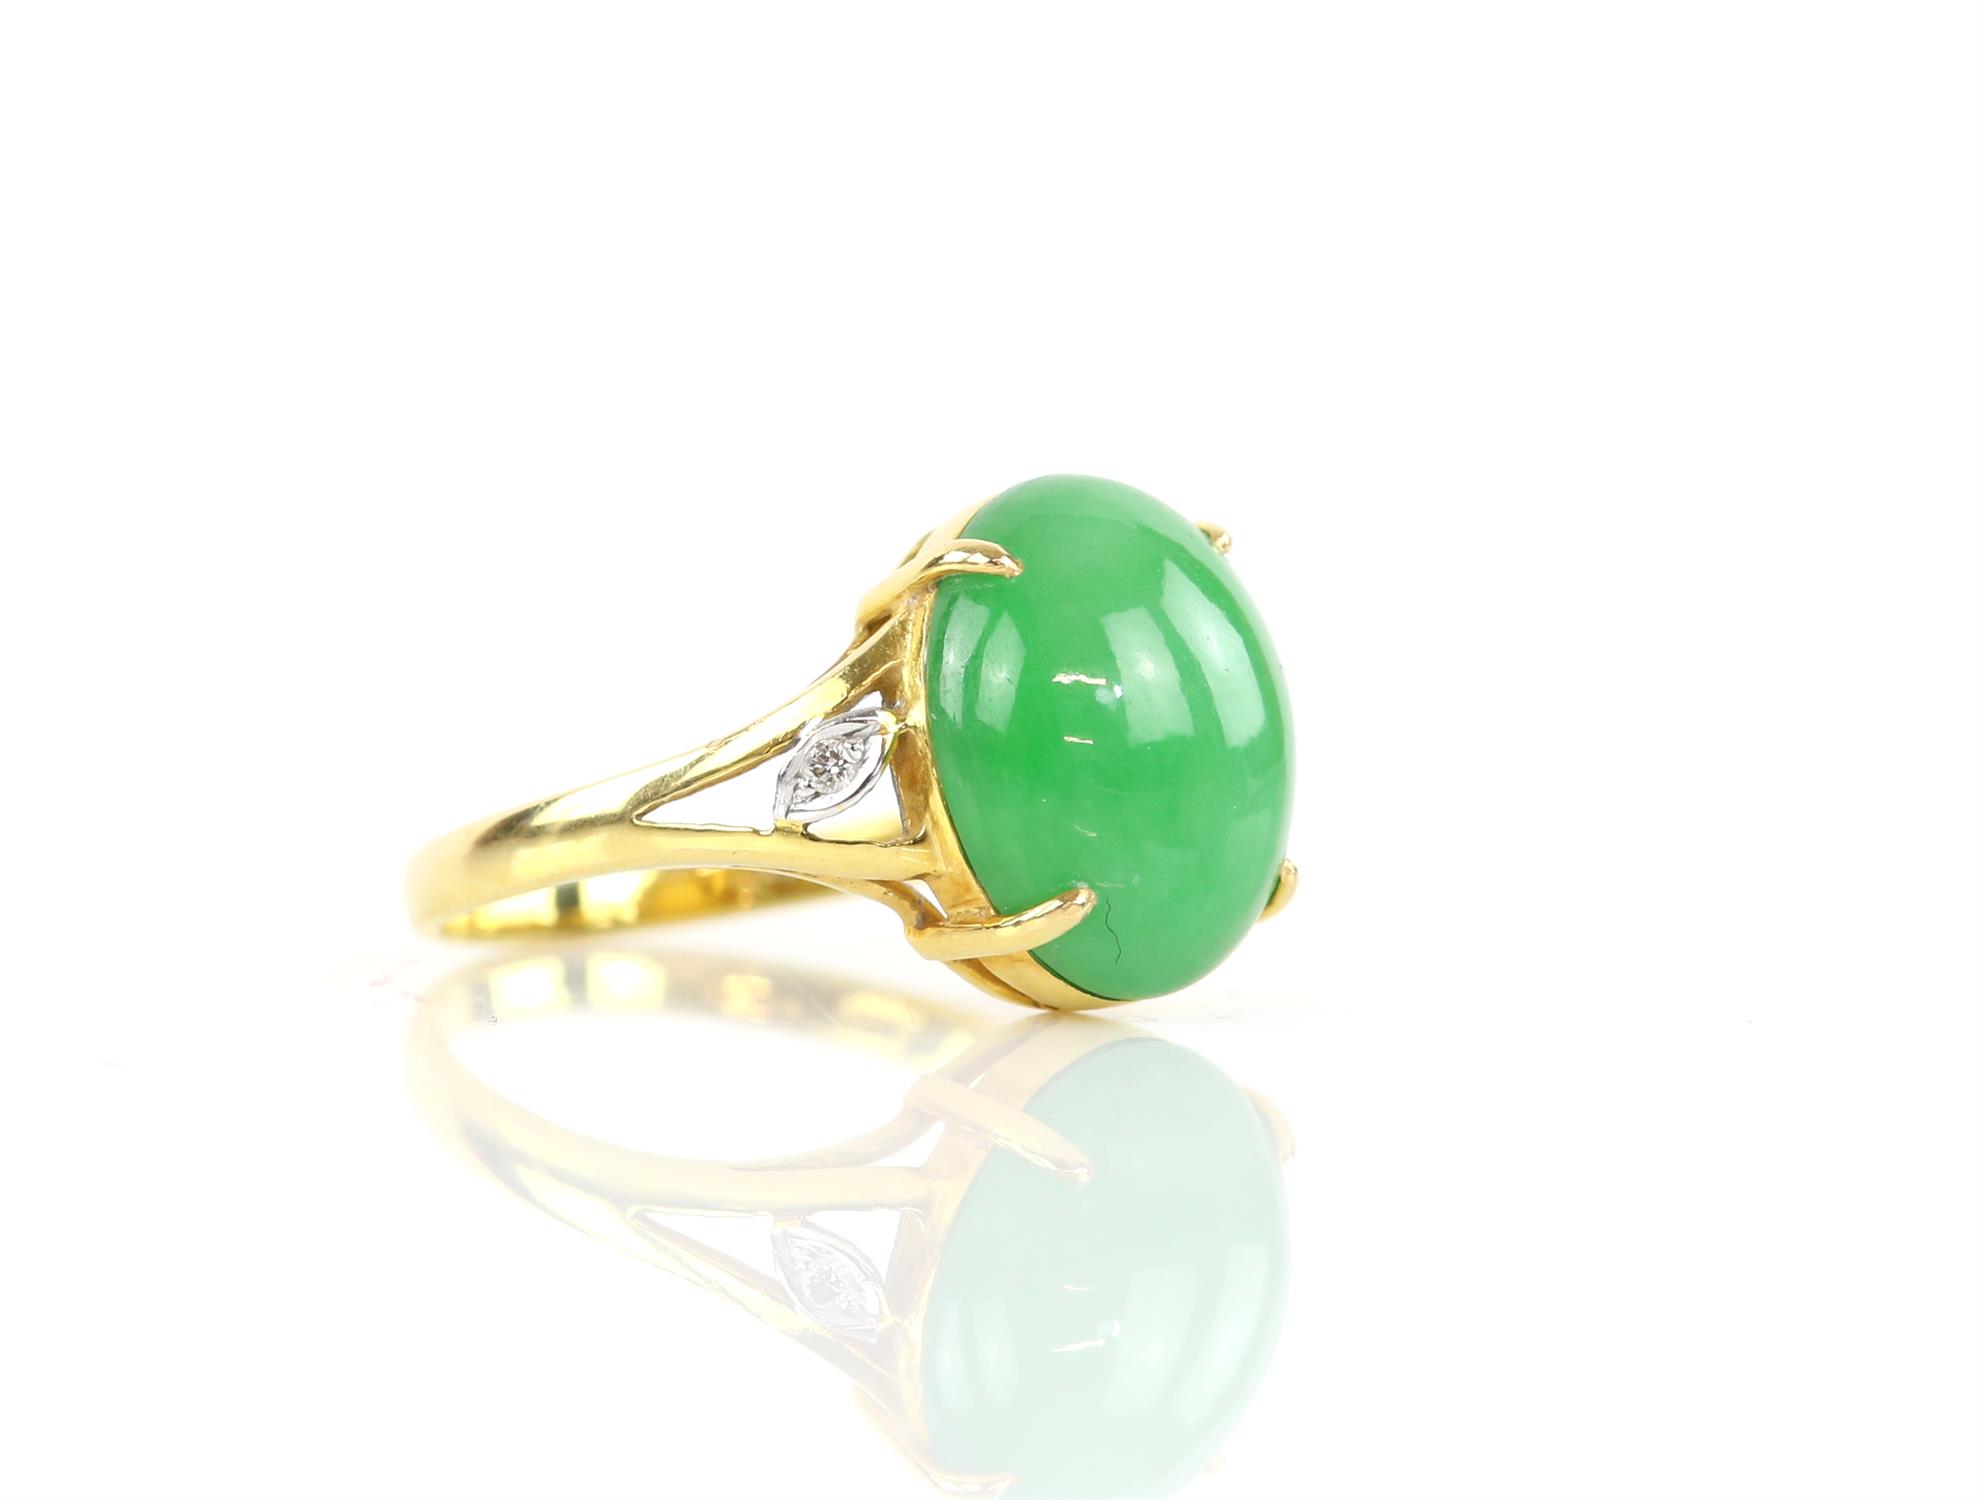 Jade and diamond ring, oval cabochon cut jade 13 x 10 mm, with round brilliant cut diamond set - Image 2 of 3